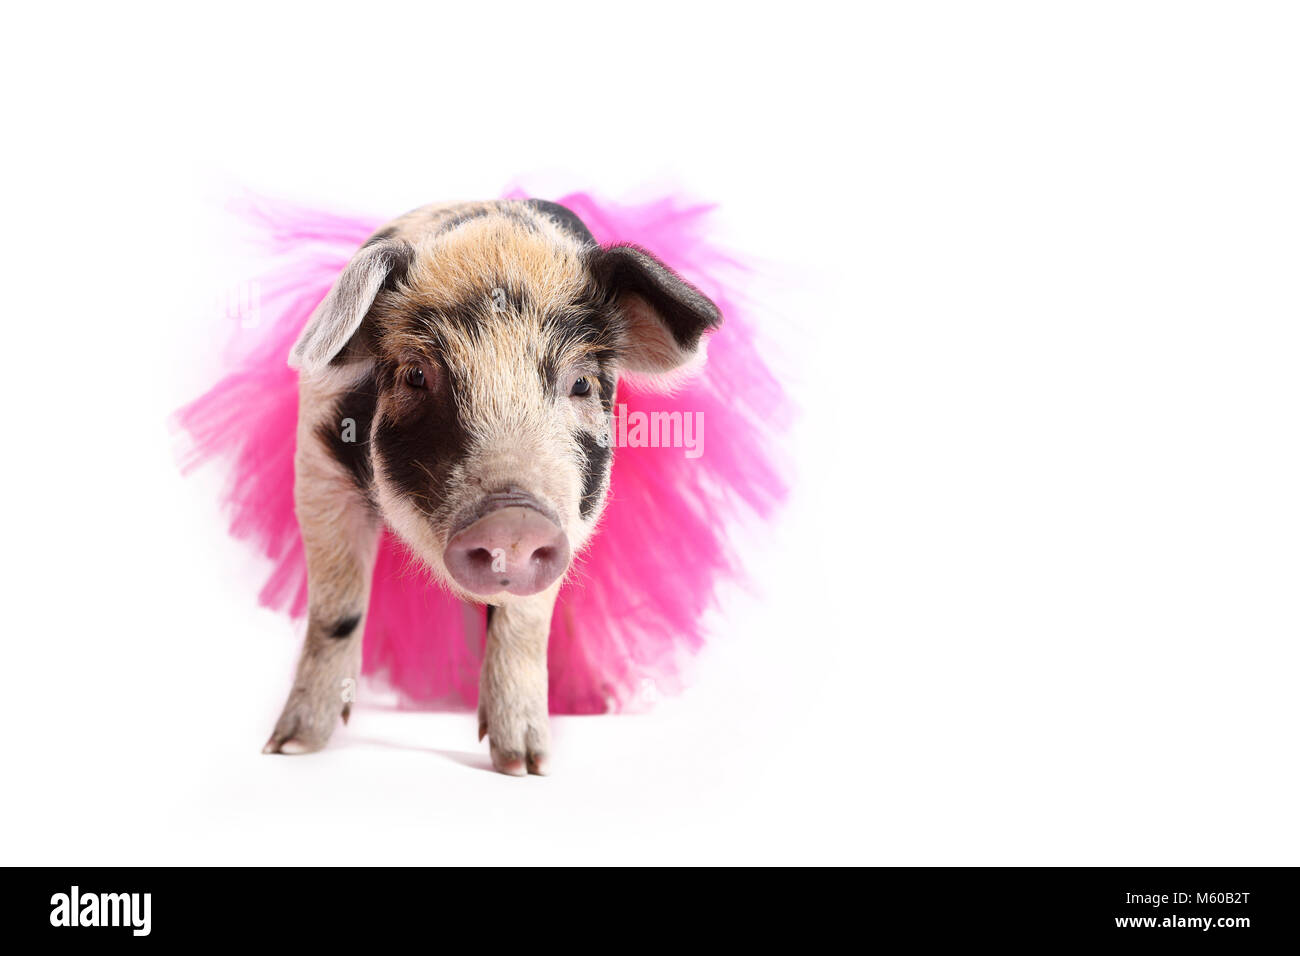 Domestic Pig, Turopolje x ?. Piglet (4 weeks old) wearing a pink tutu, standing. Studio picture seen against a white background. Germany Stock Photo